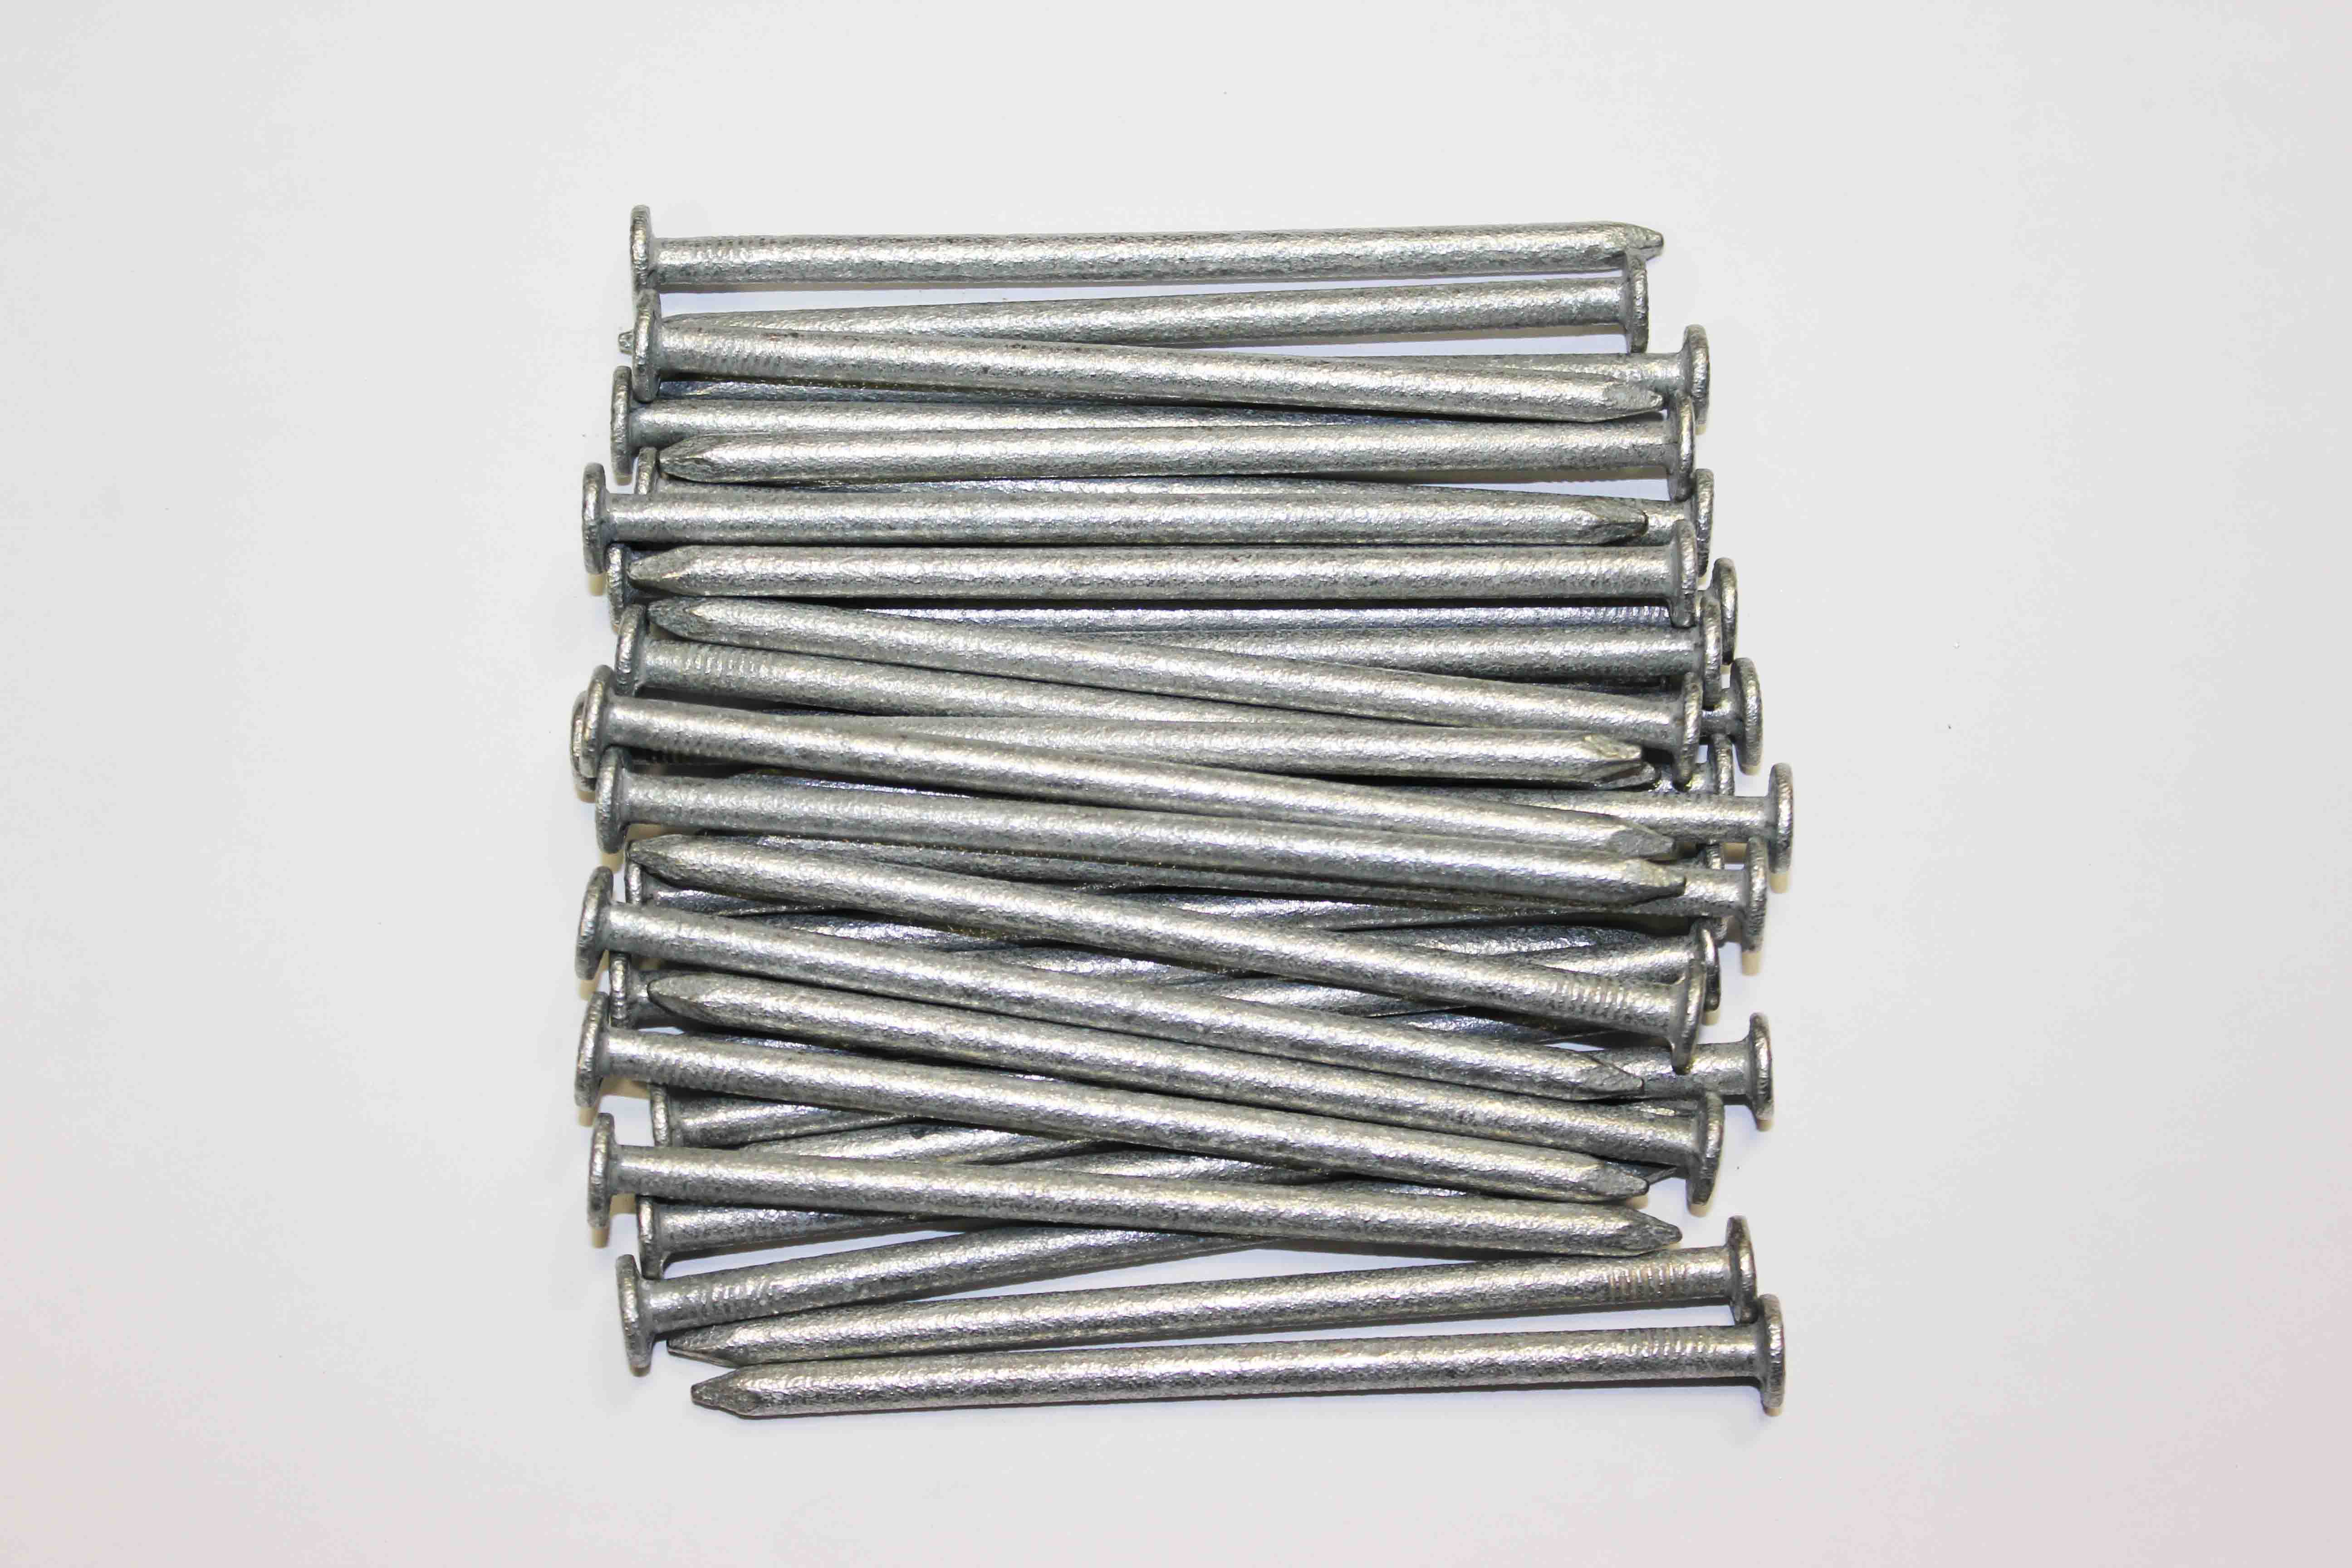 100mm fencing nails